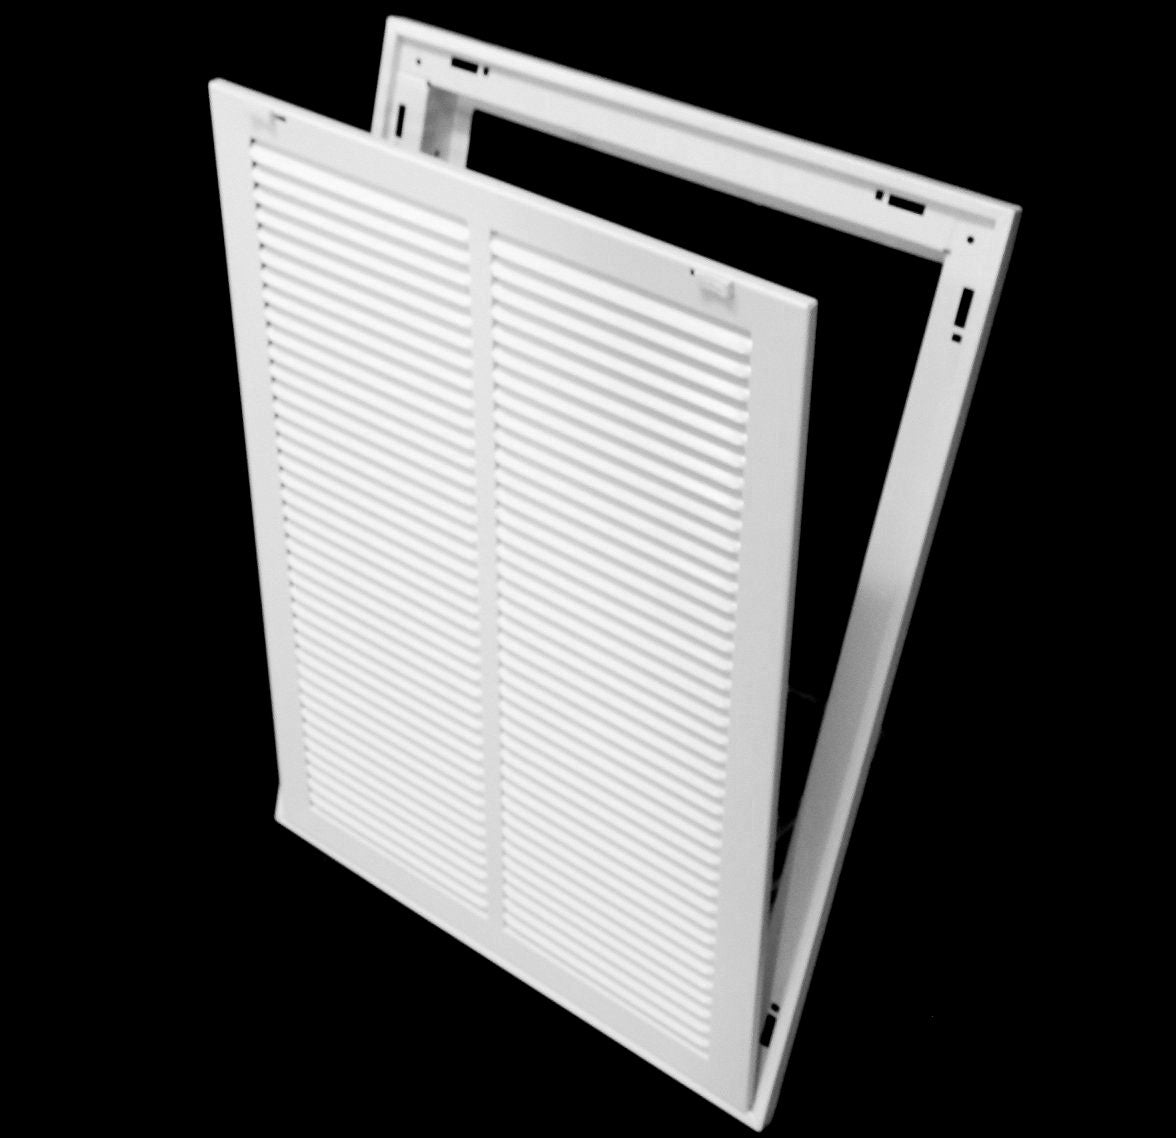 14&quot; X 20&quot; Steel Return Air Filter Grille for 1&quot; Filter - Removable Frame - [Outer Dimensions: 16 5/8&quot; X 22 5/8&quot;]